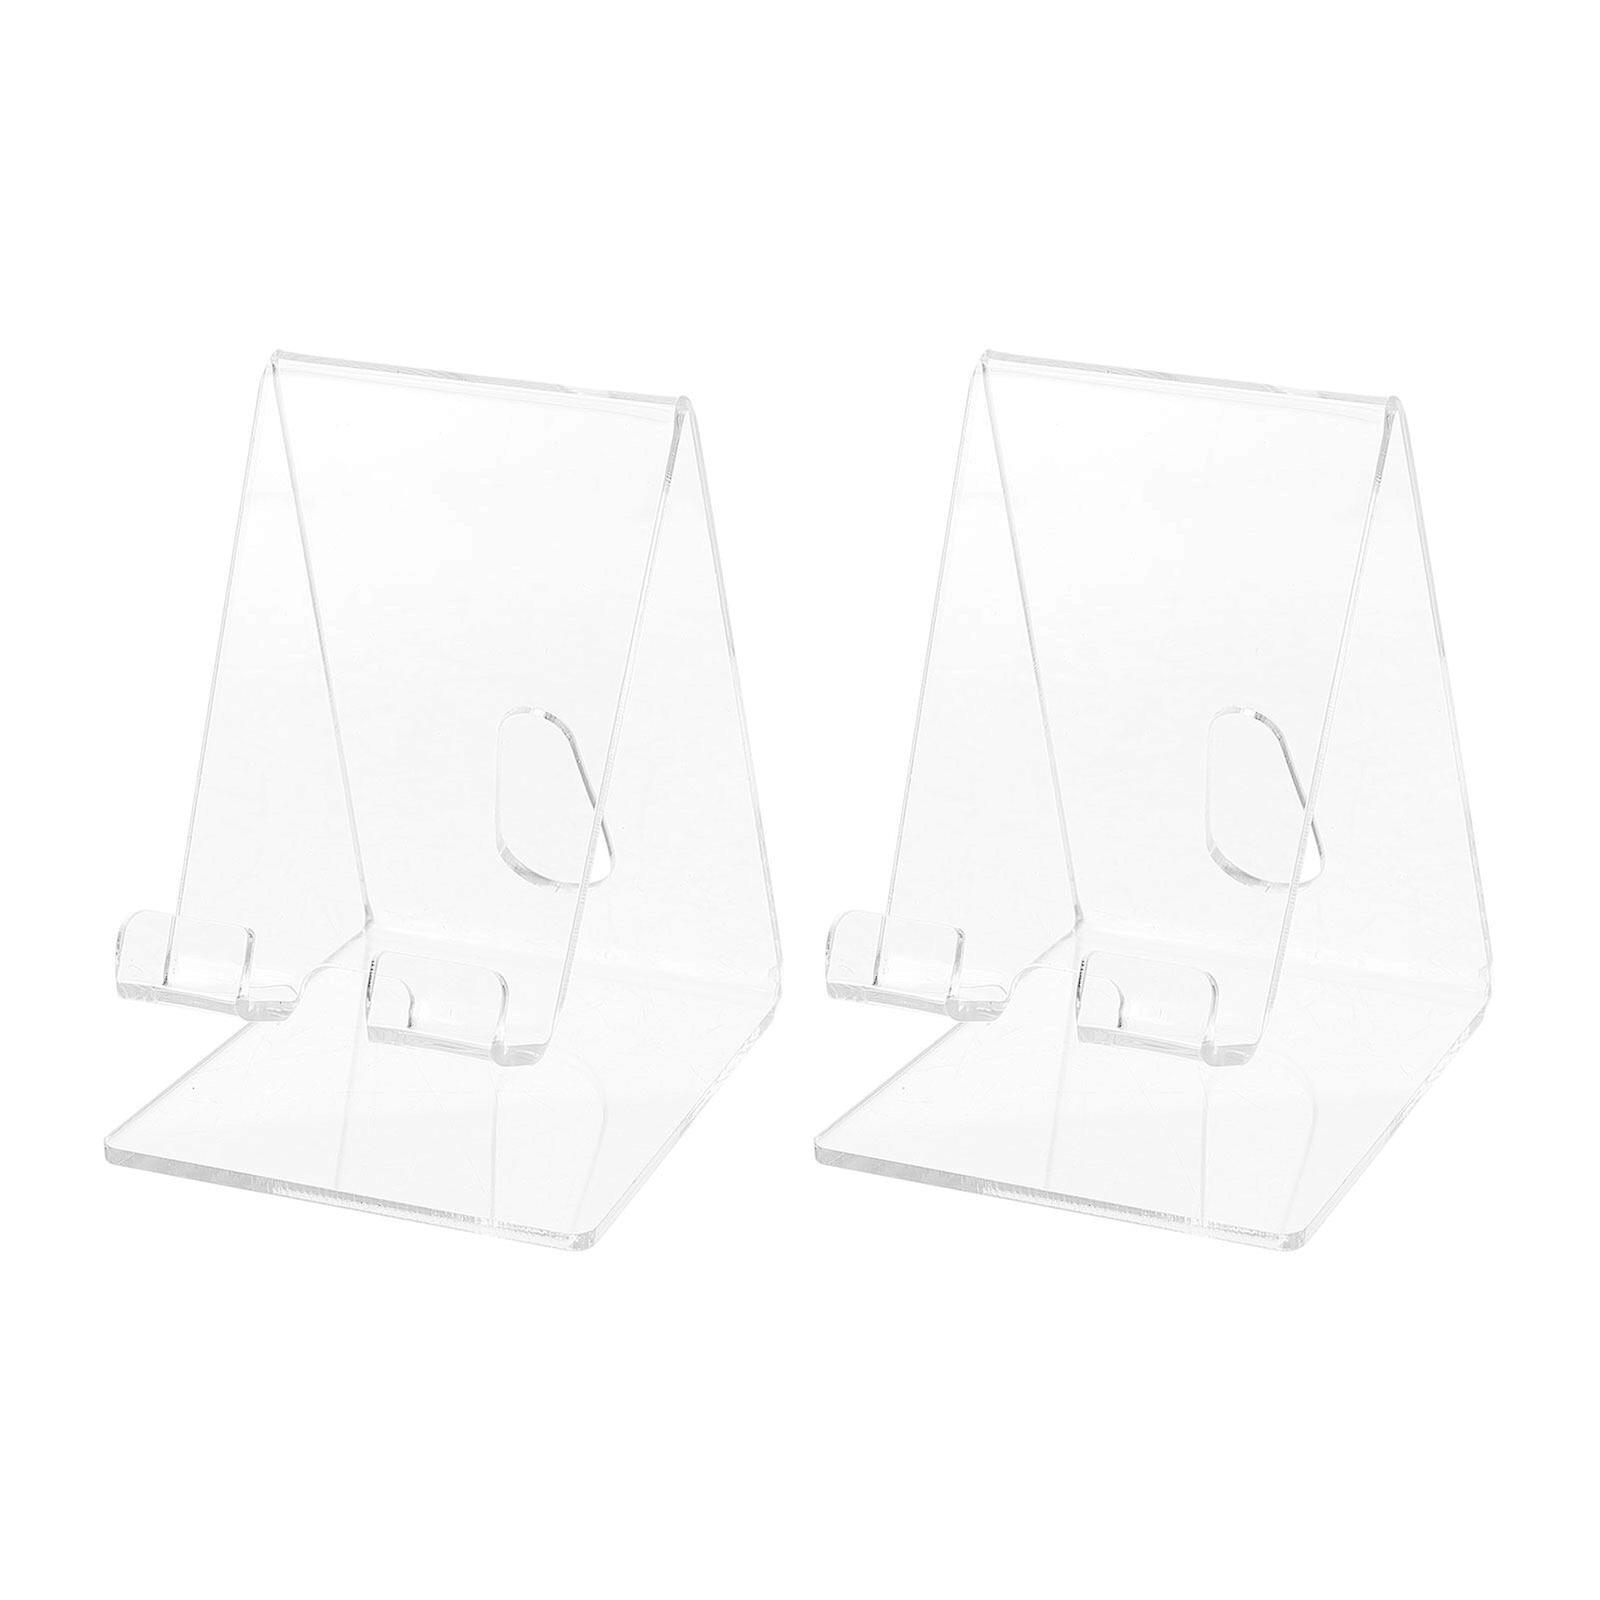 2pcs Acrylic Mobile Phone Display Holder Cellphone Stand Retail Show Racks